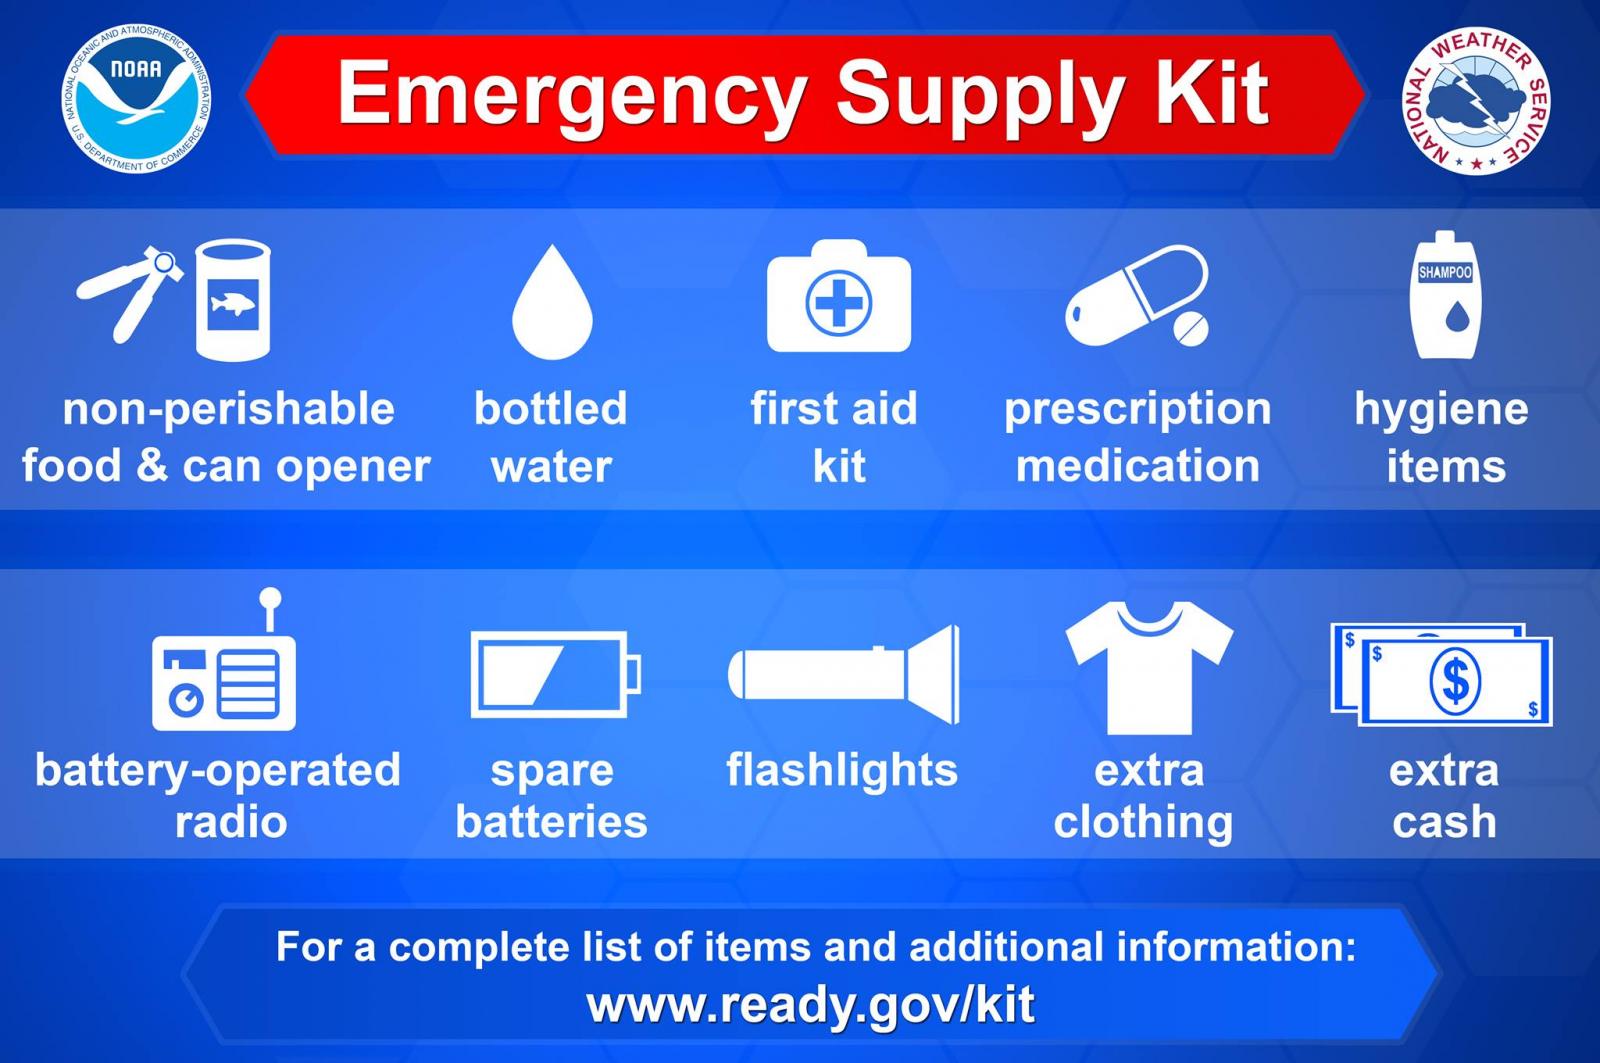 6 Ways to Prepare for a Snow Storm  Weather emergency, Emergency  preparedness kit, Emergency prepardness